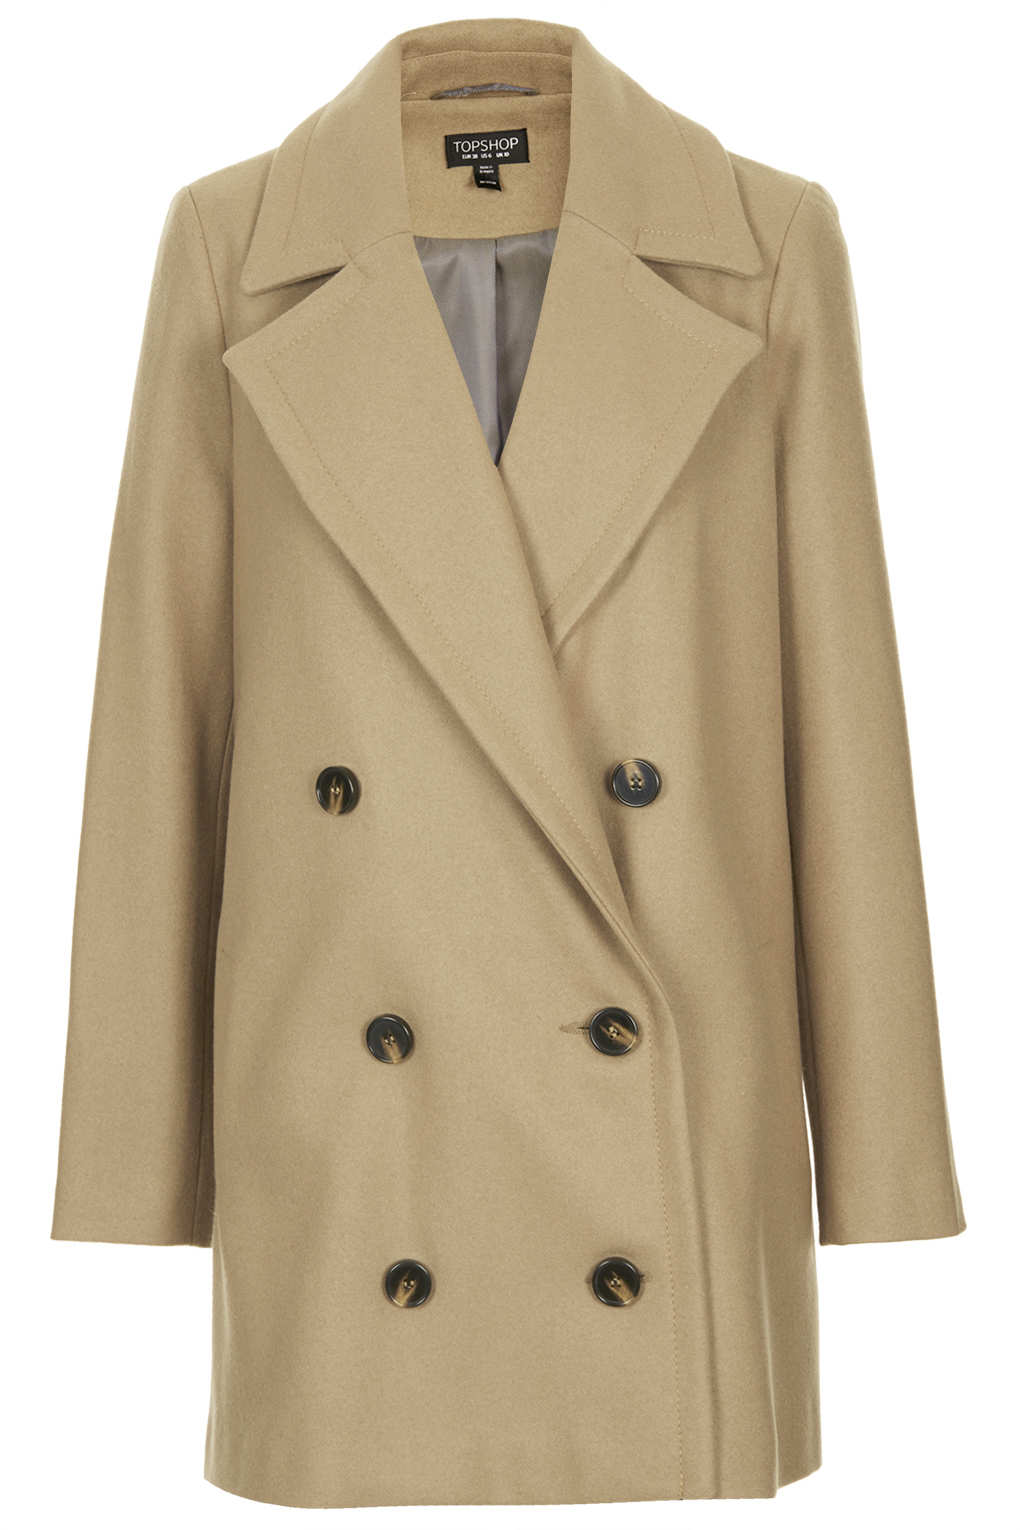 Lyst - Topshop Double Breasted Pea Coat in Natural